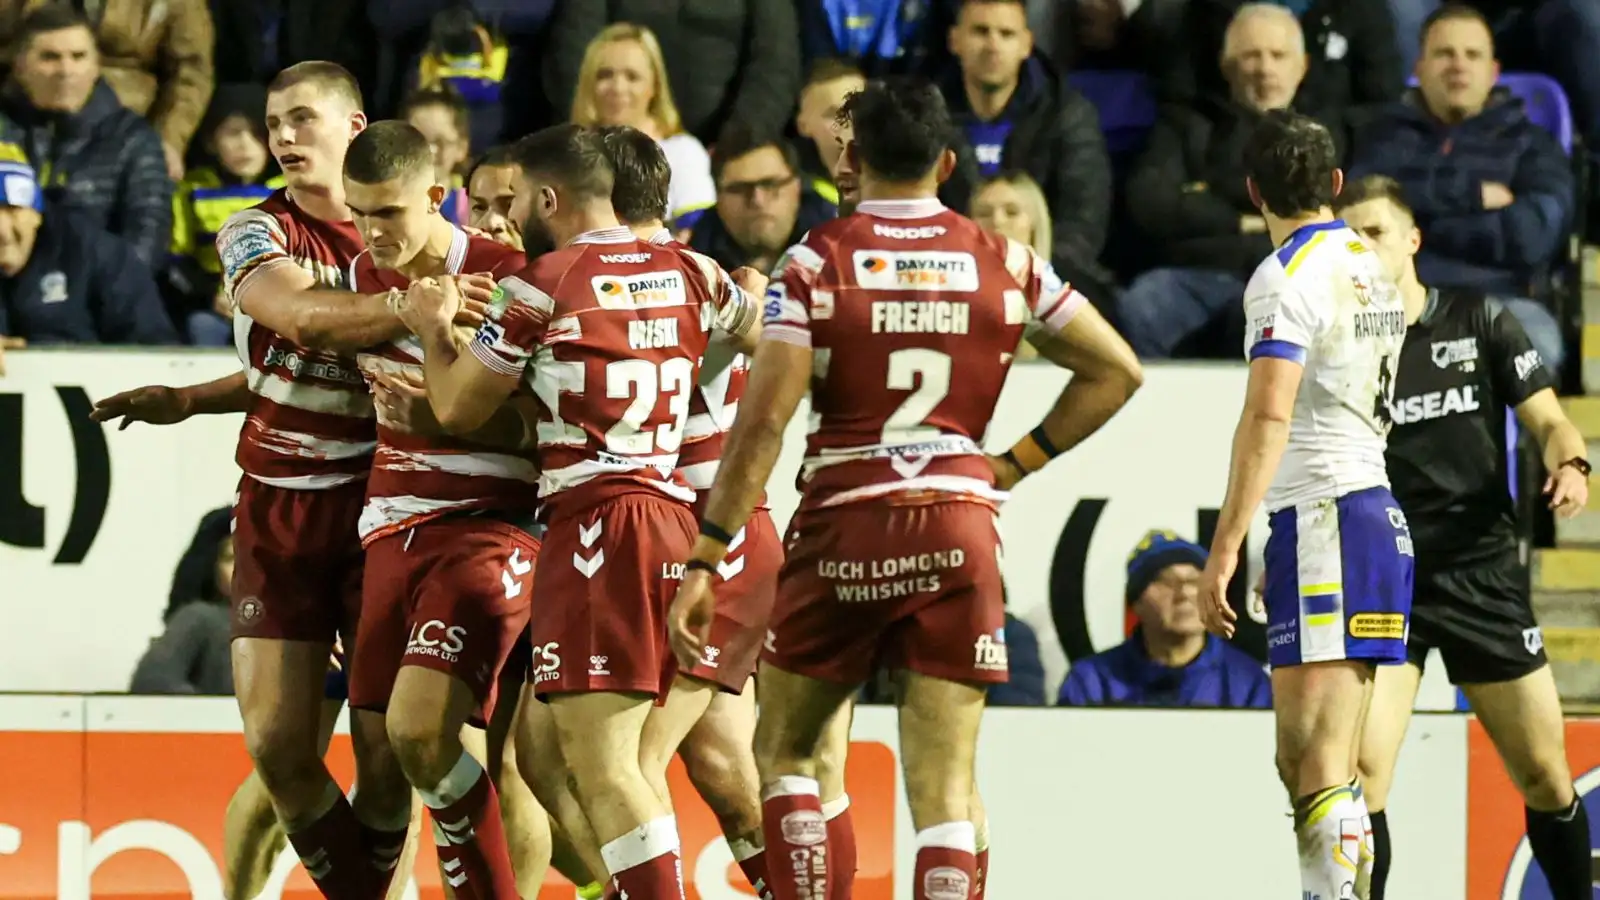 WATCH: Wigan try splits opinions in top-of-the-table clash